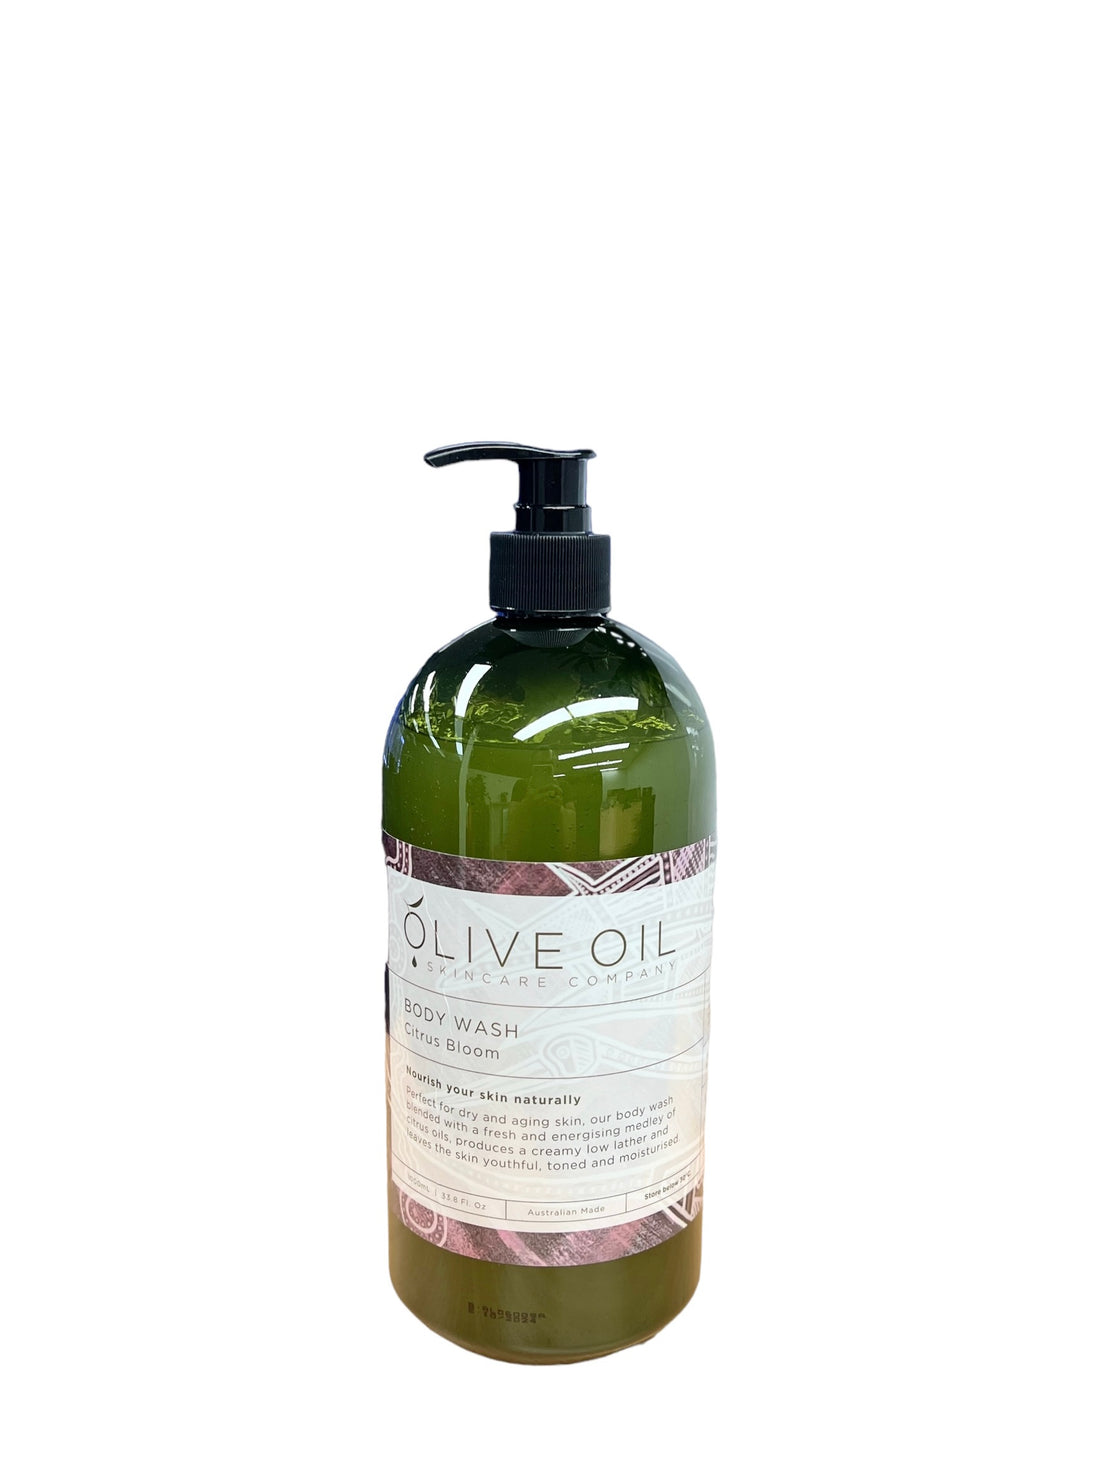 Limited Edition: Body Wash, Castile Style, Citrus Bloom, 1000 ml